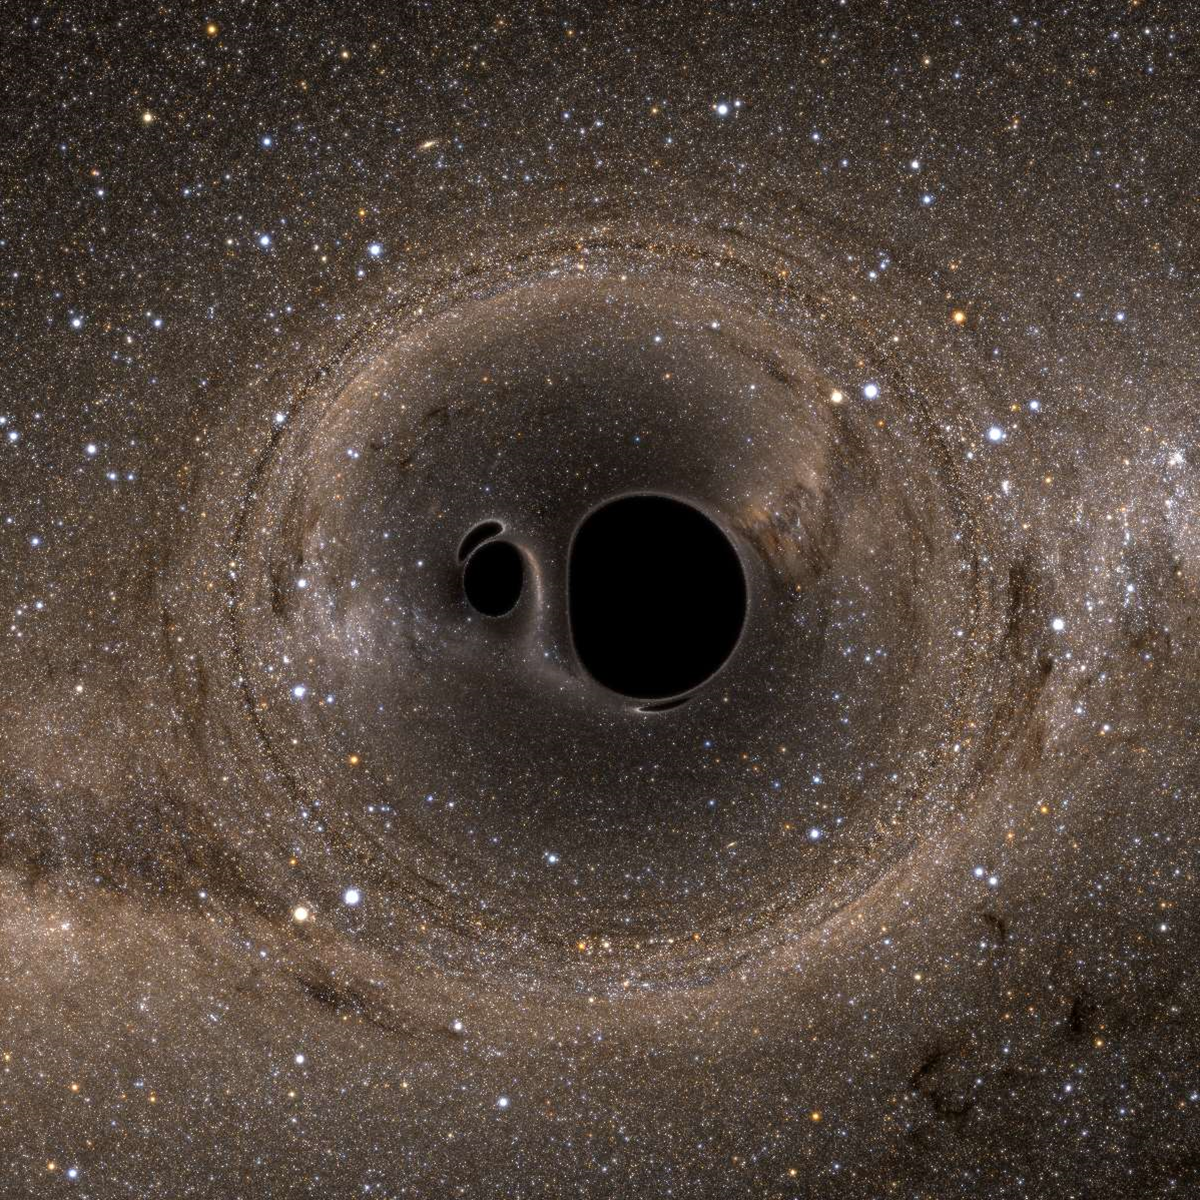 A pair of black holes merges every three minutes somewhere in the universe.